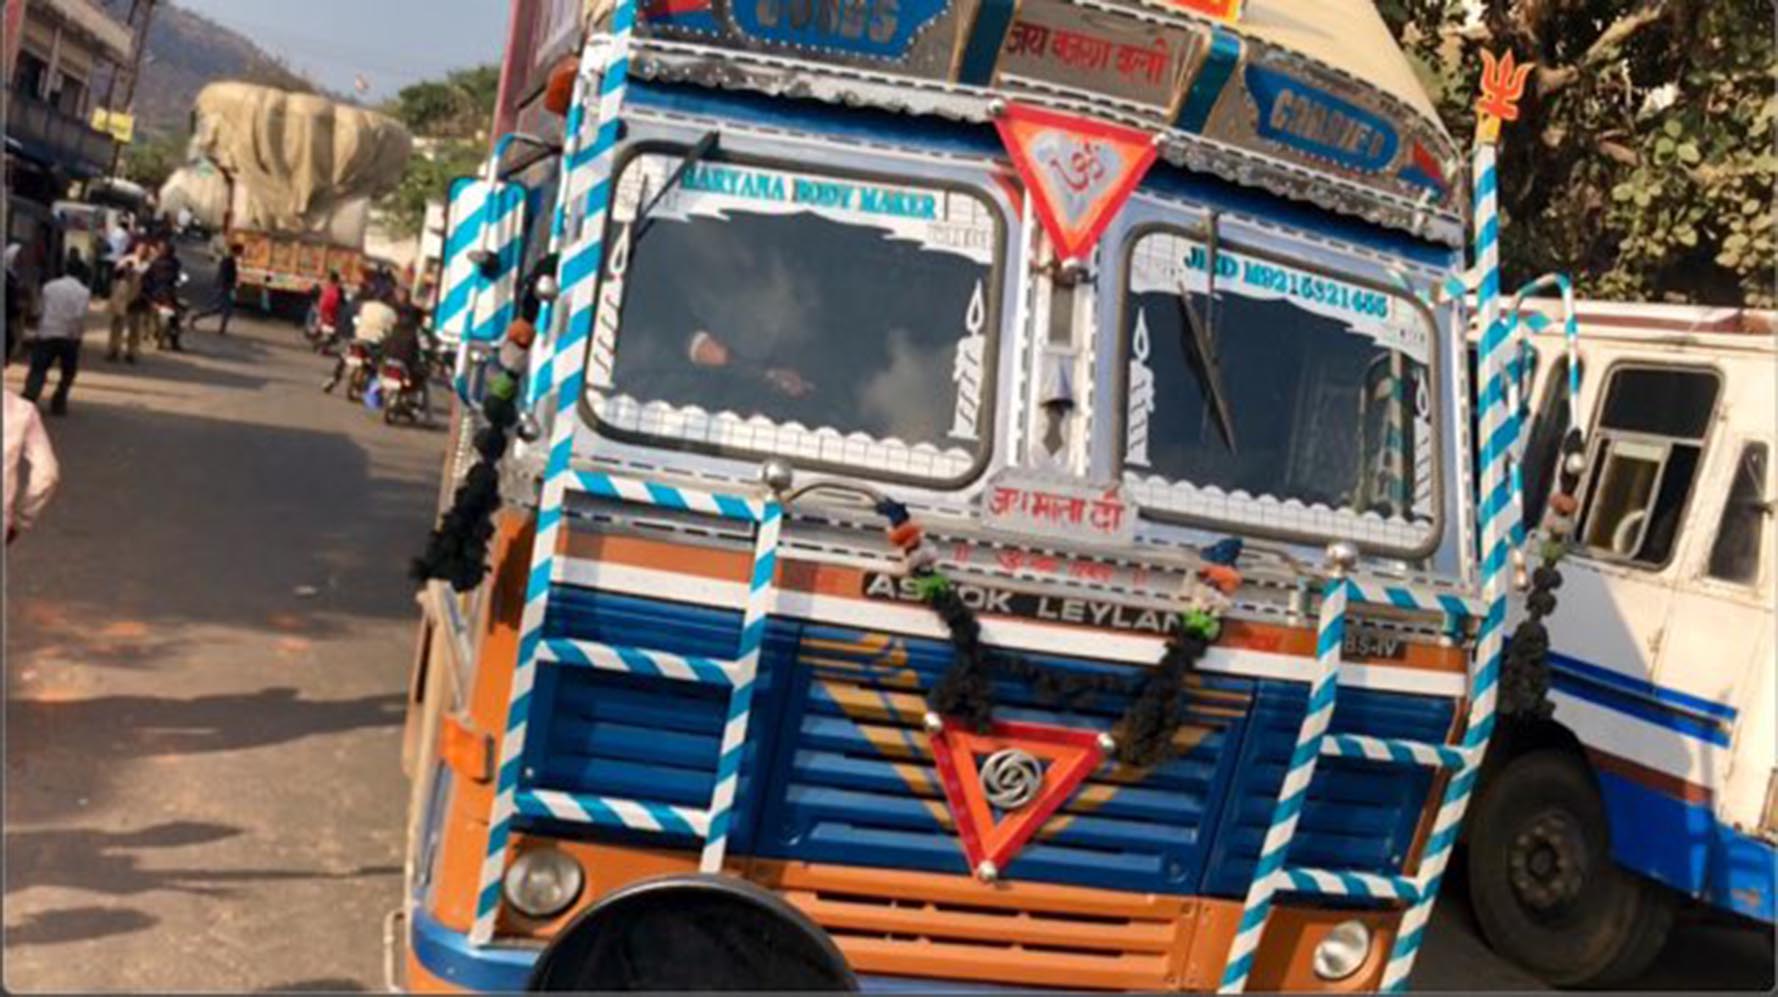 Colorful bus in Rajasthan